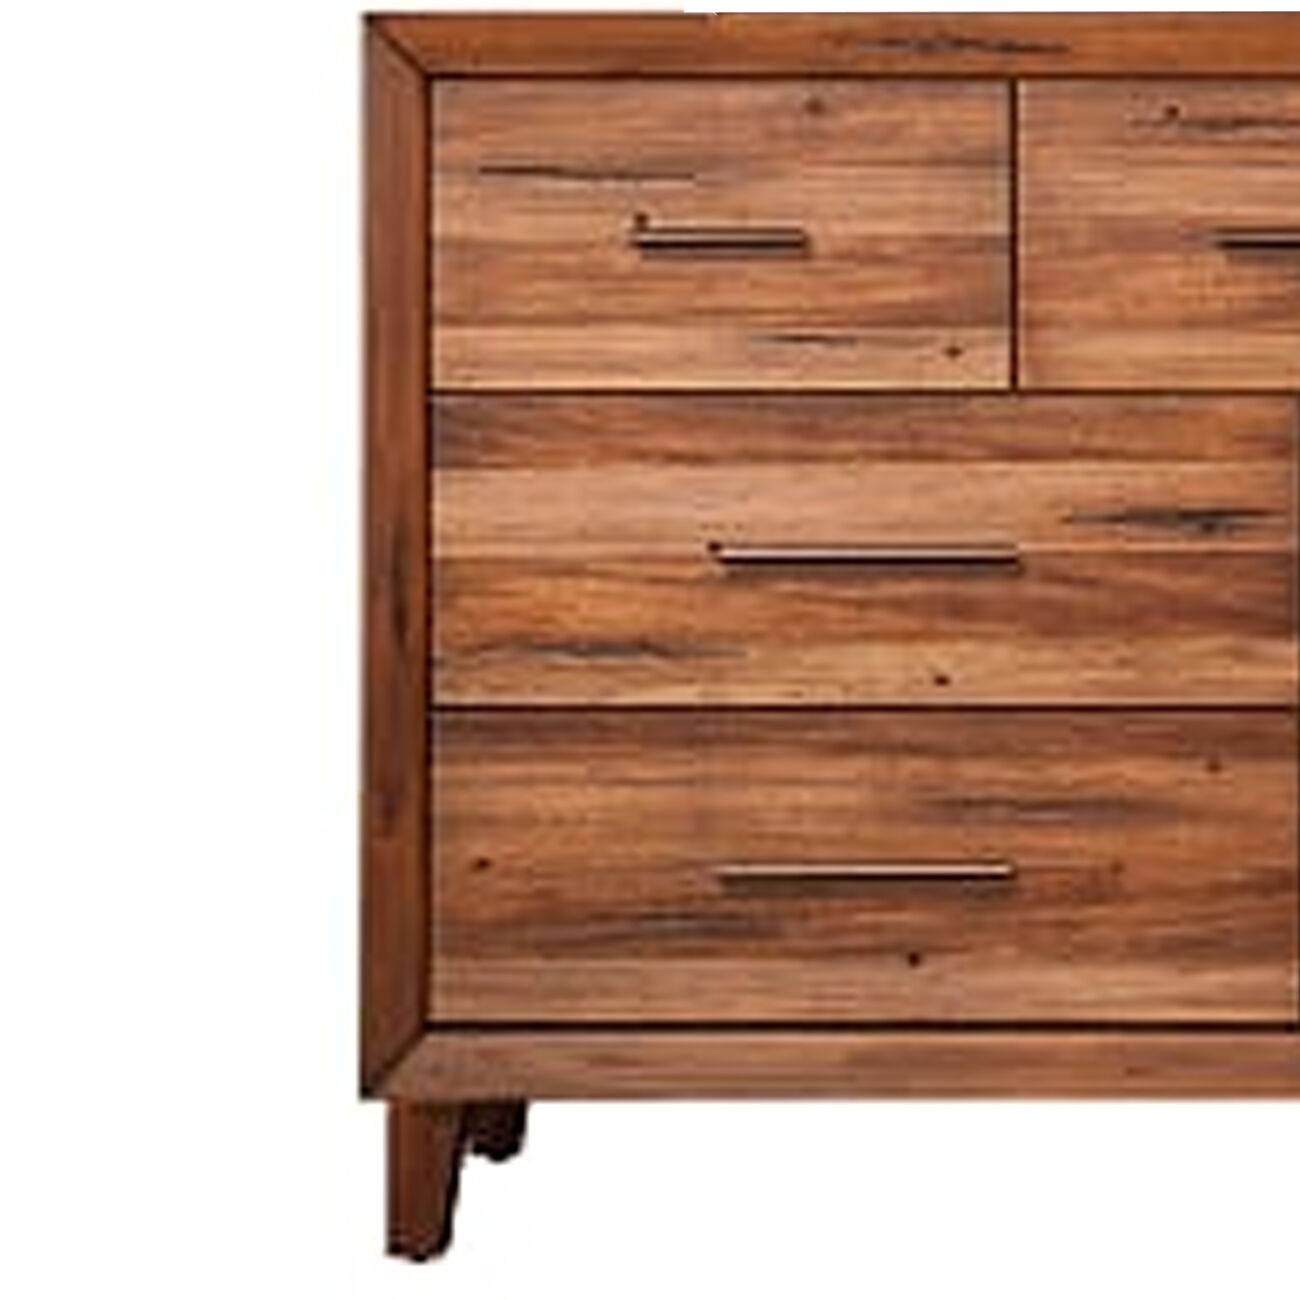 Transitional Style 7 Drawer Dresser with Metal Bar Handles, Brown